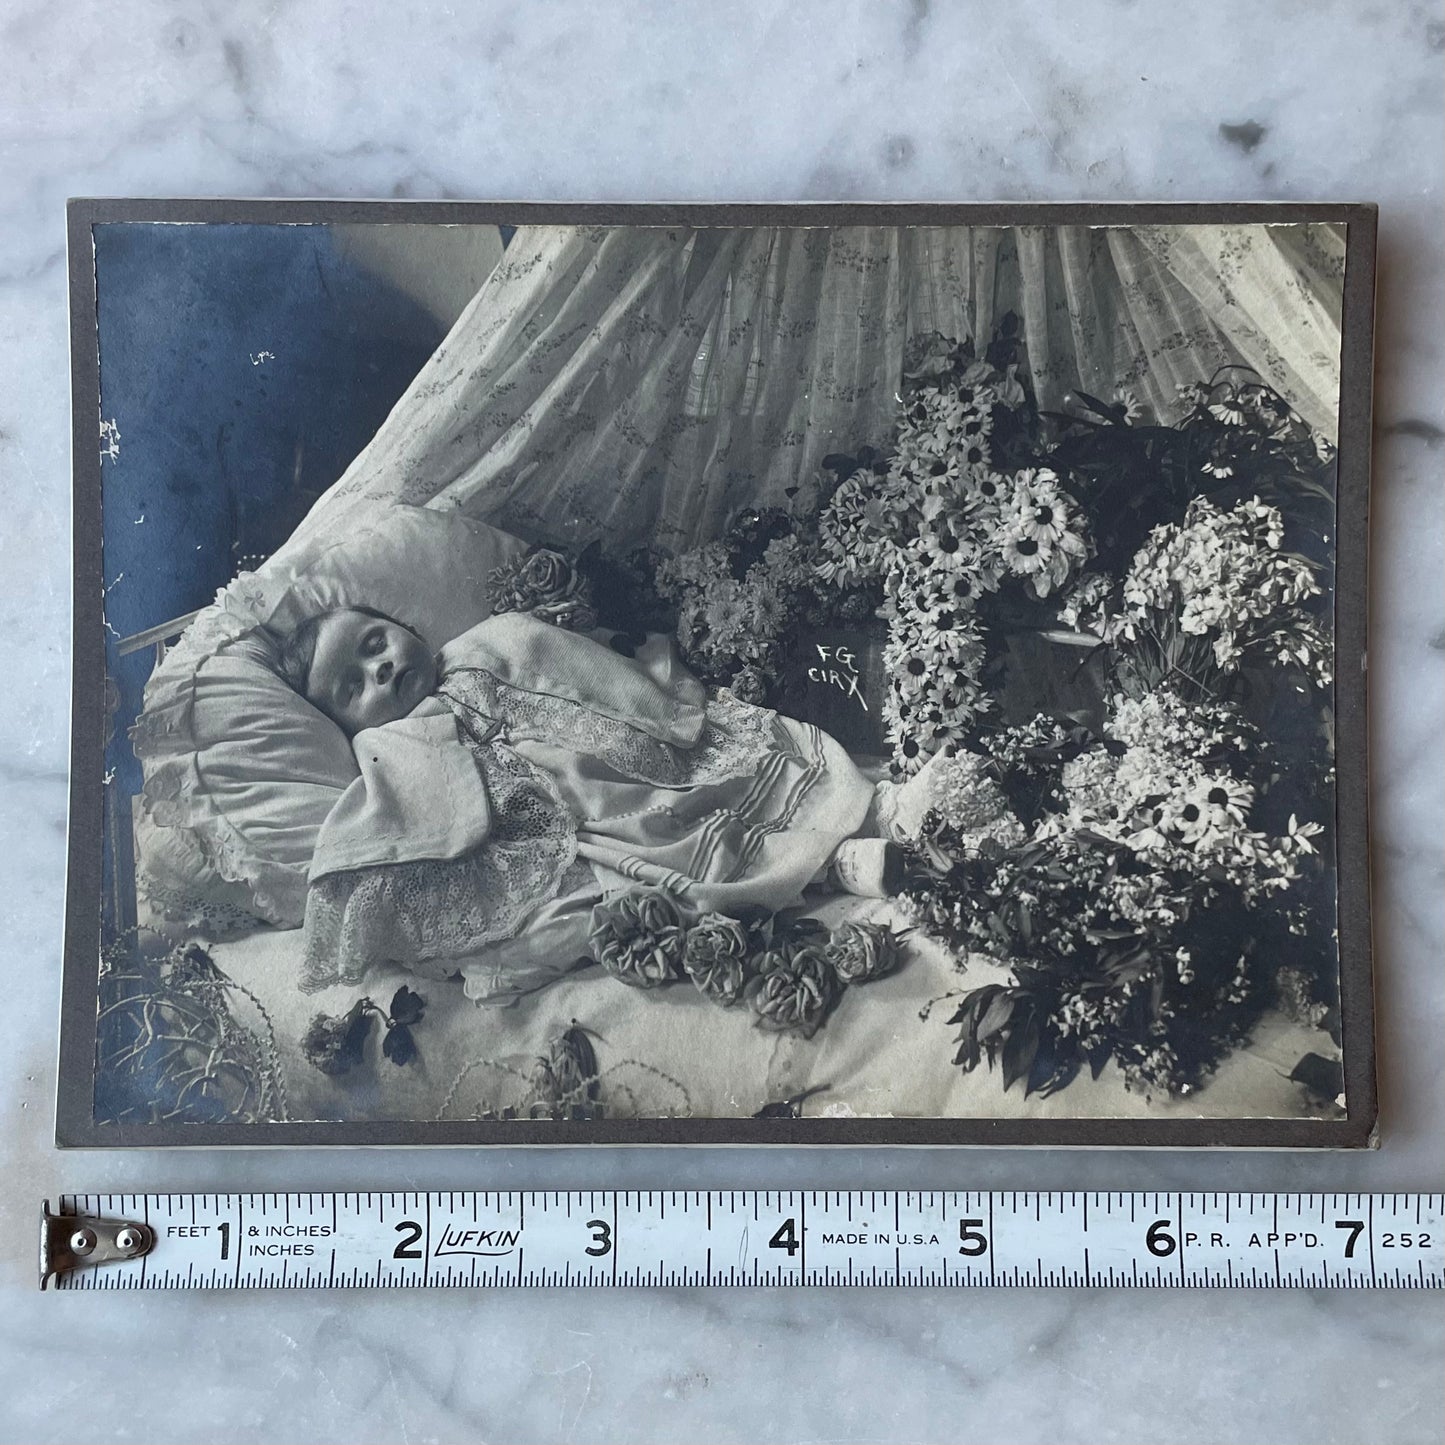 Post Mortem Photo of Baby Surrounded by Flowers